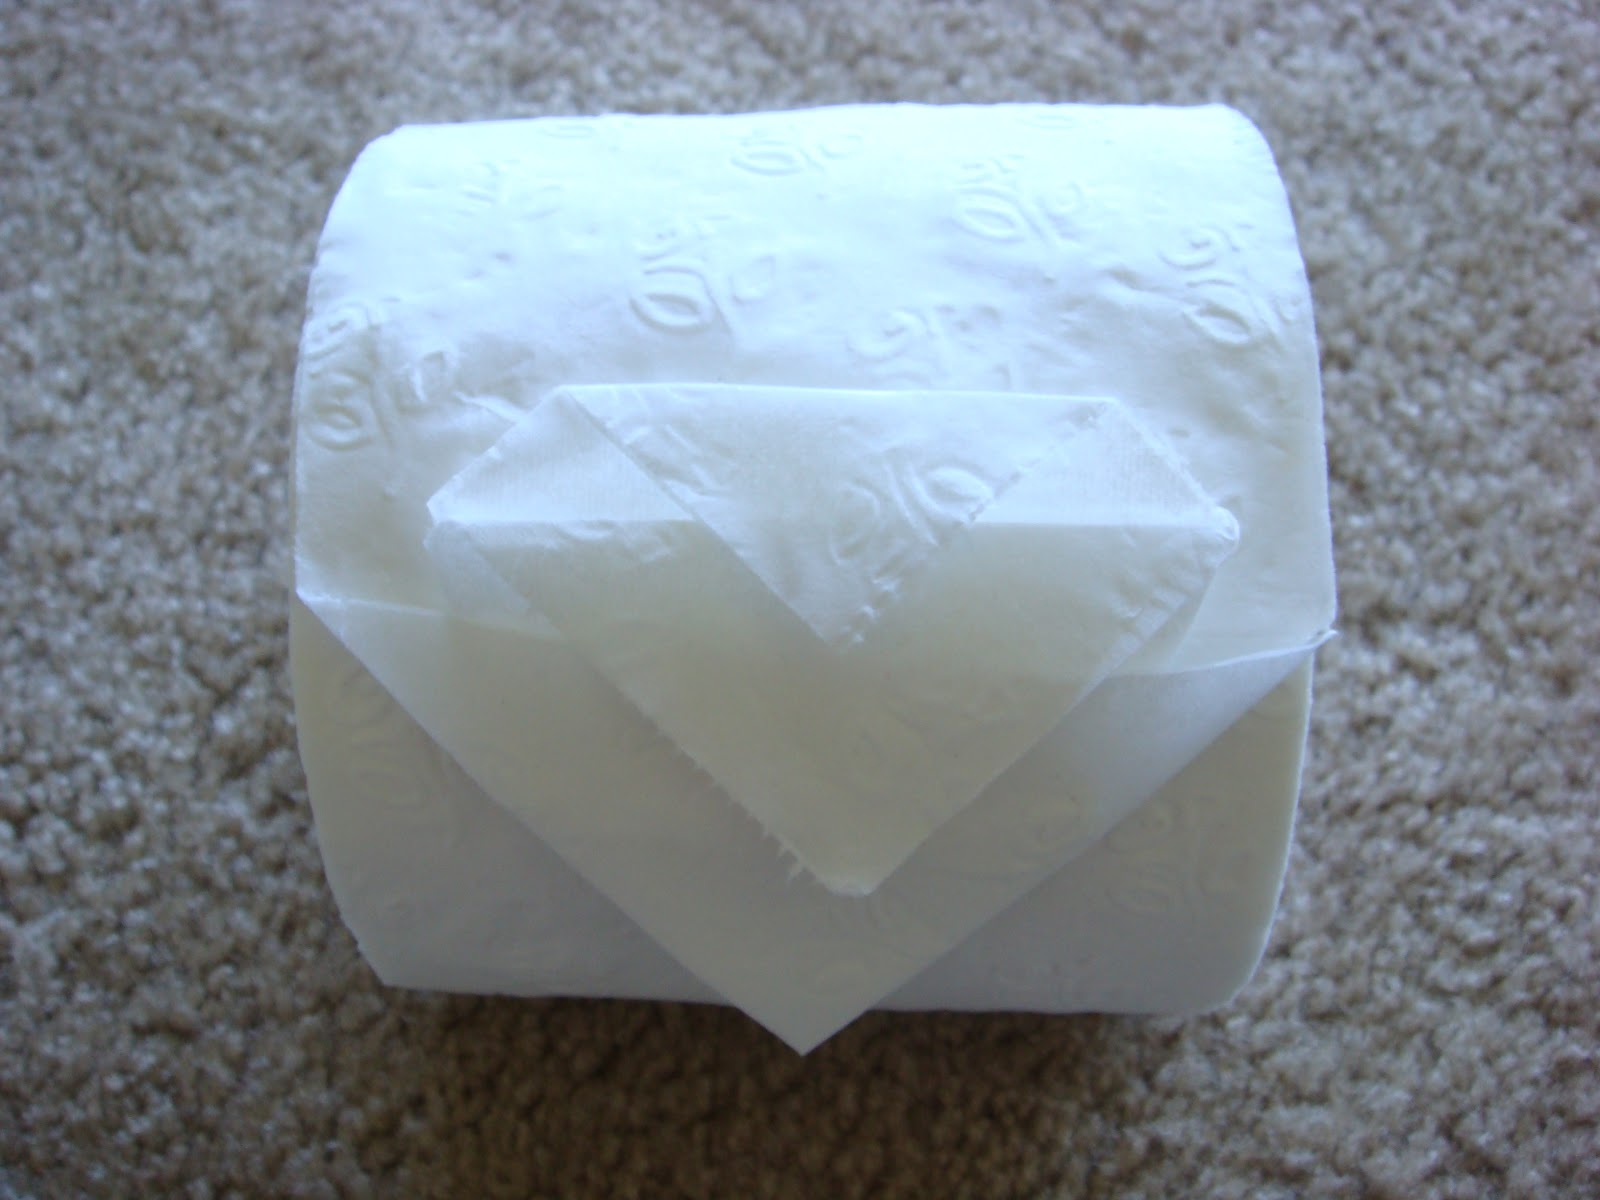 Origami Toilet Paper Toilet Paper Origami Triple Point Amypayroo